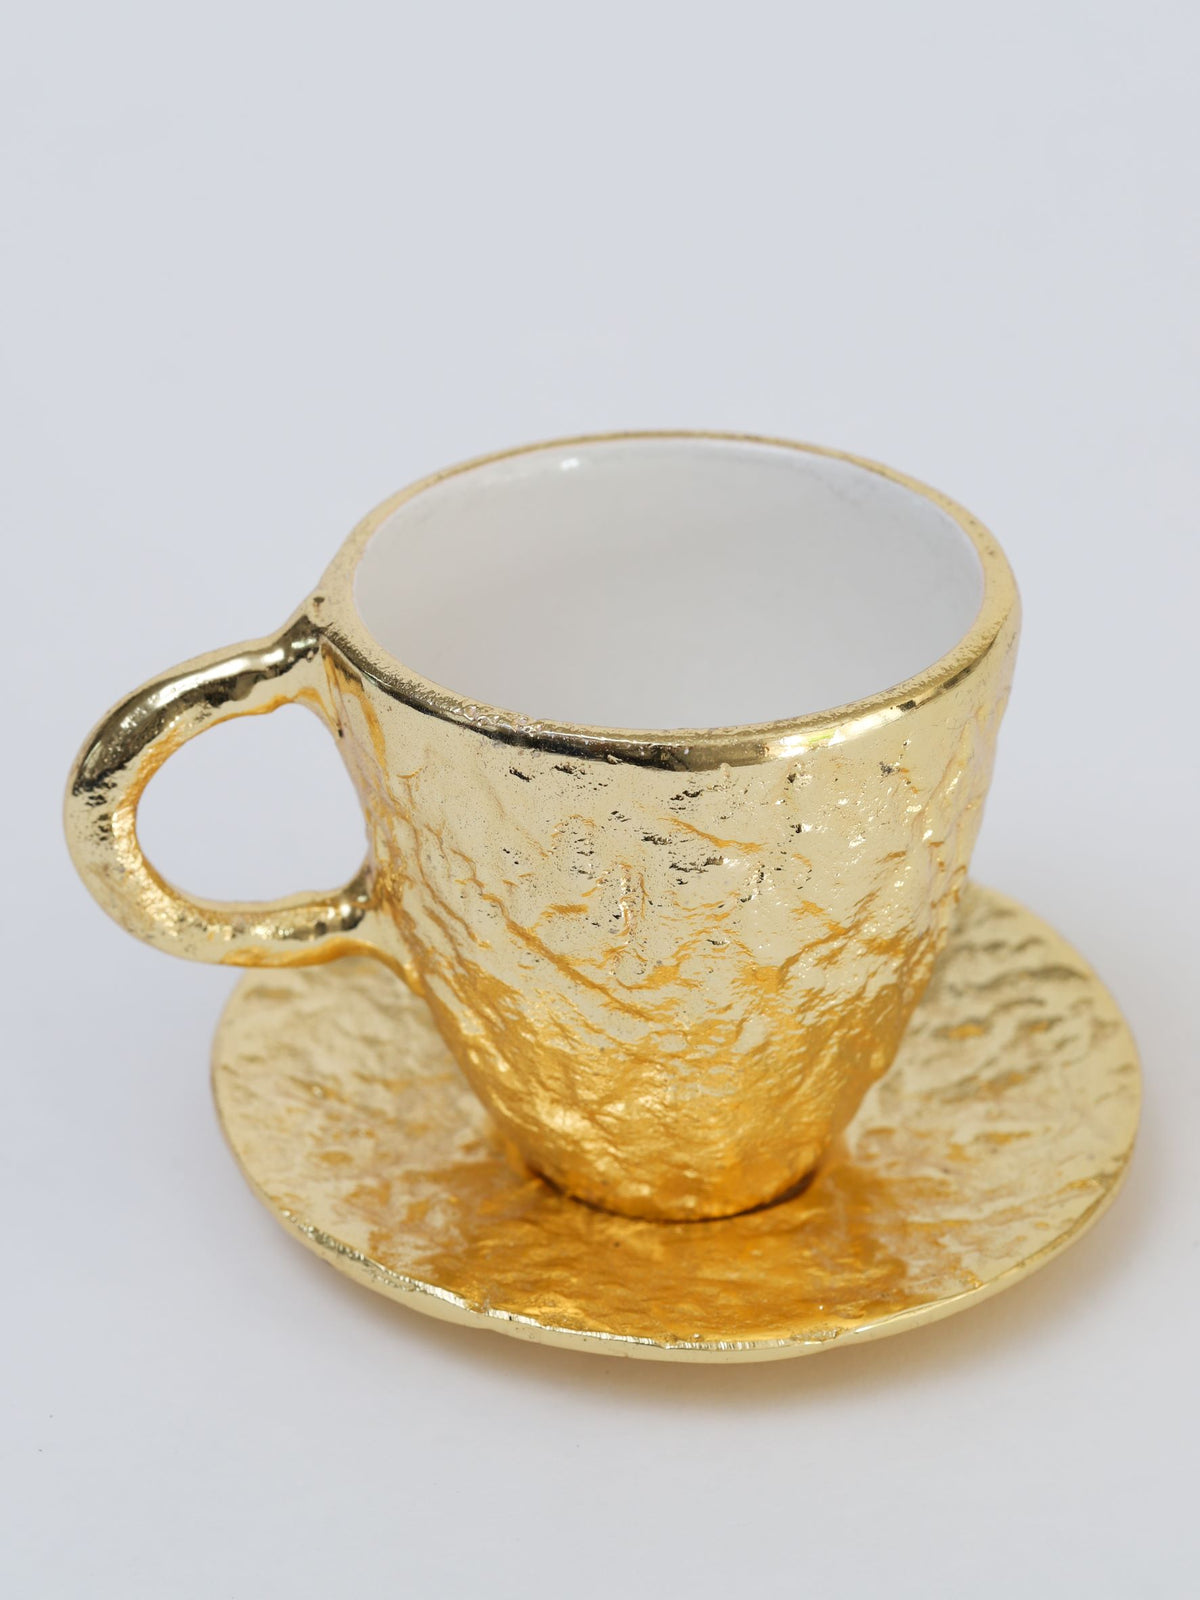 https://www.shopinspiremehomedecor.shop/wp-content/uploads/1693/26/gold-textured-metal-tea-cup-and-saucer-with-white-interior-inspire-me-home-decor-explore-a-world-of-possibilities-take-a-look-at-our-extensive-selection_1.jpg